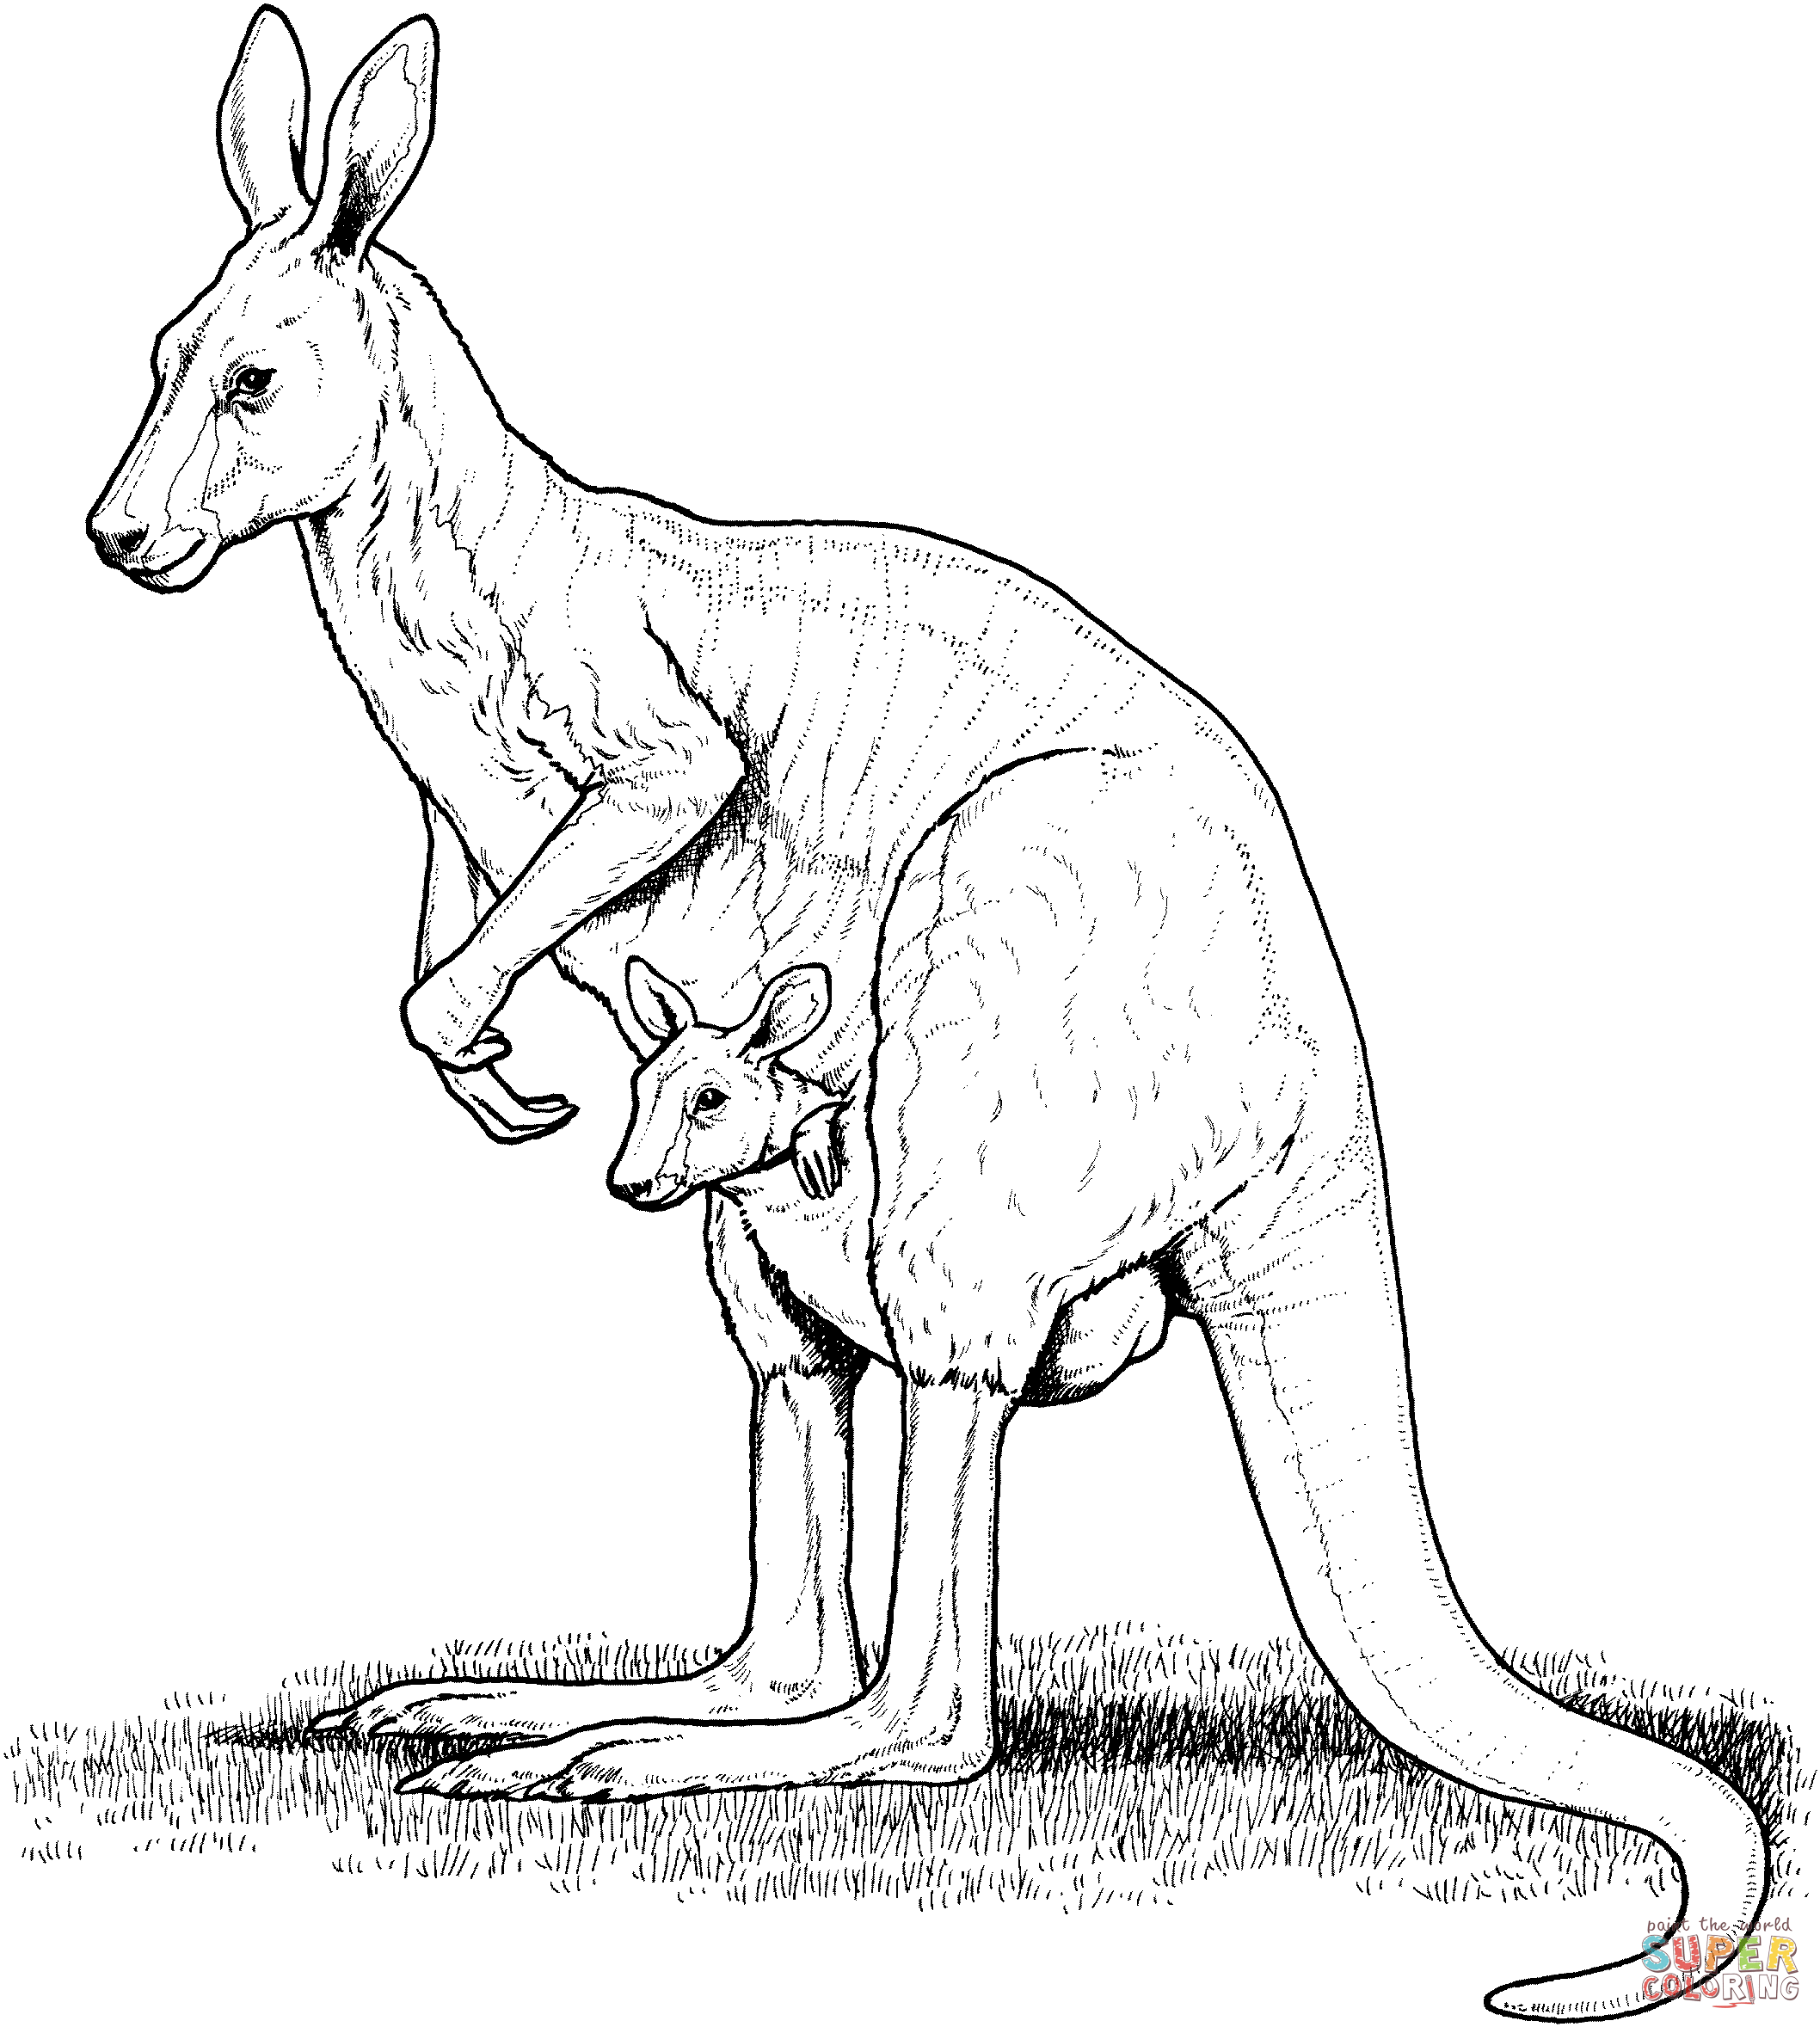 Kangaroos coloring pages | Free Coloring Pages